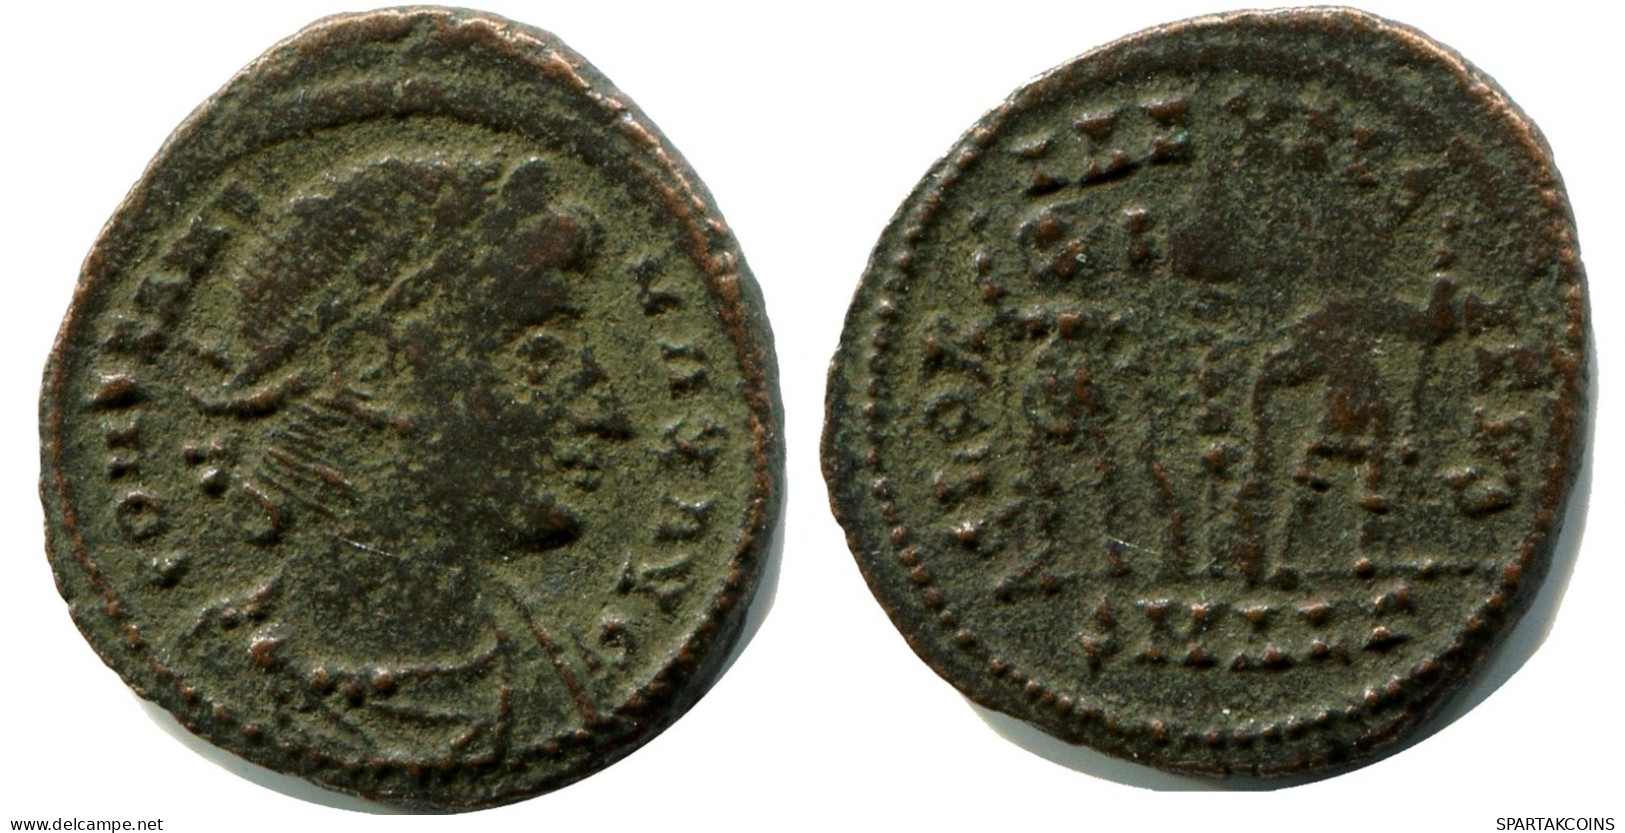 CONSTANS MINTED IN ALEKSANDRIA FOUND IN IHNASYAH HOARD EGYPT #ANC11406.14.U.A - The Christian Empire (307 AD Tot 363 AD)